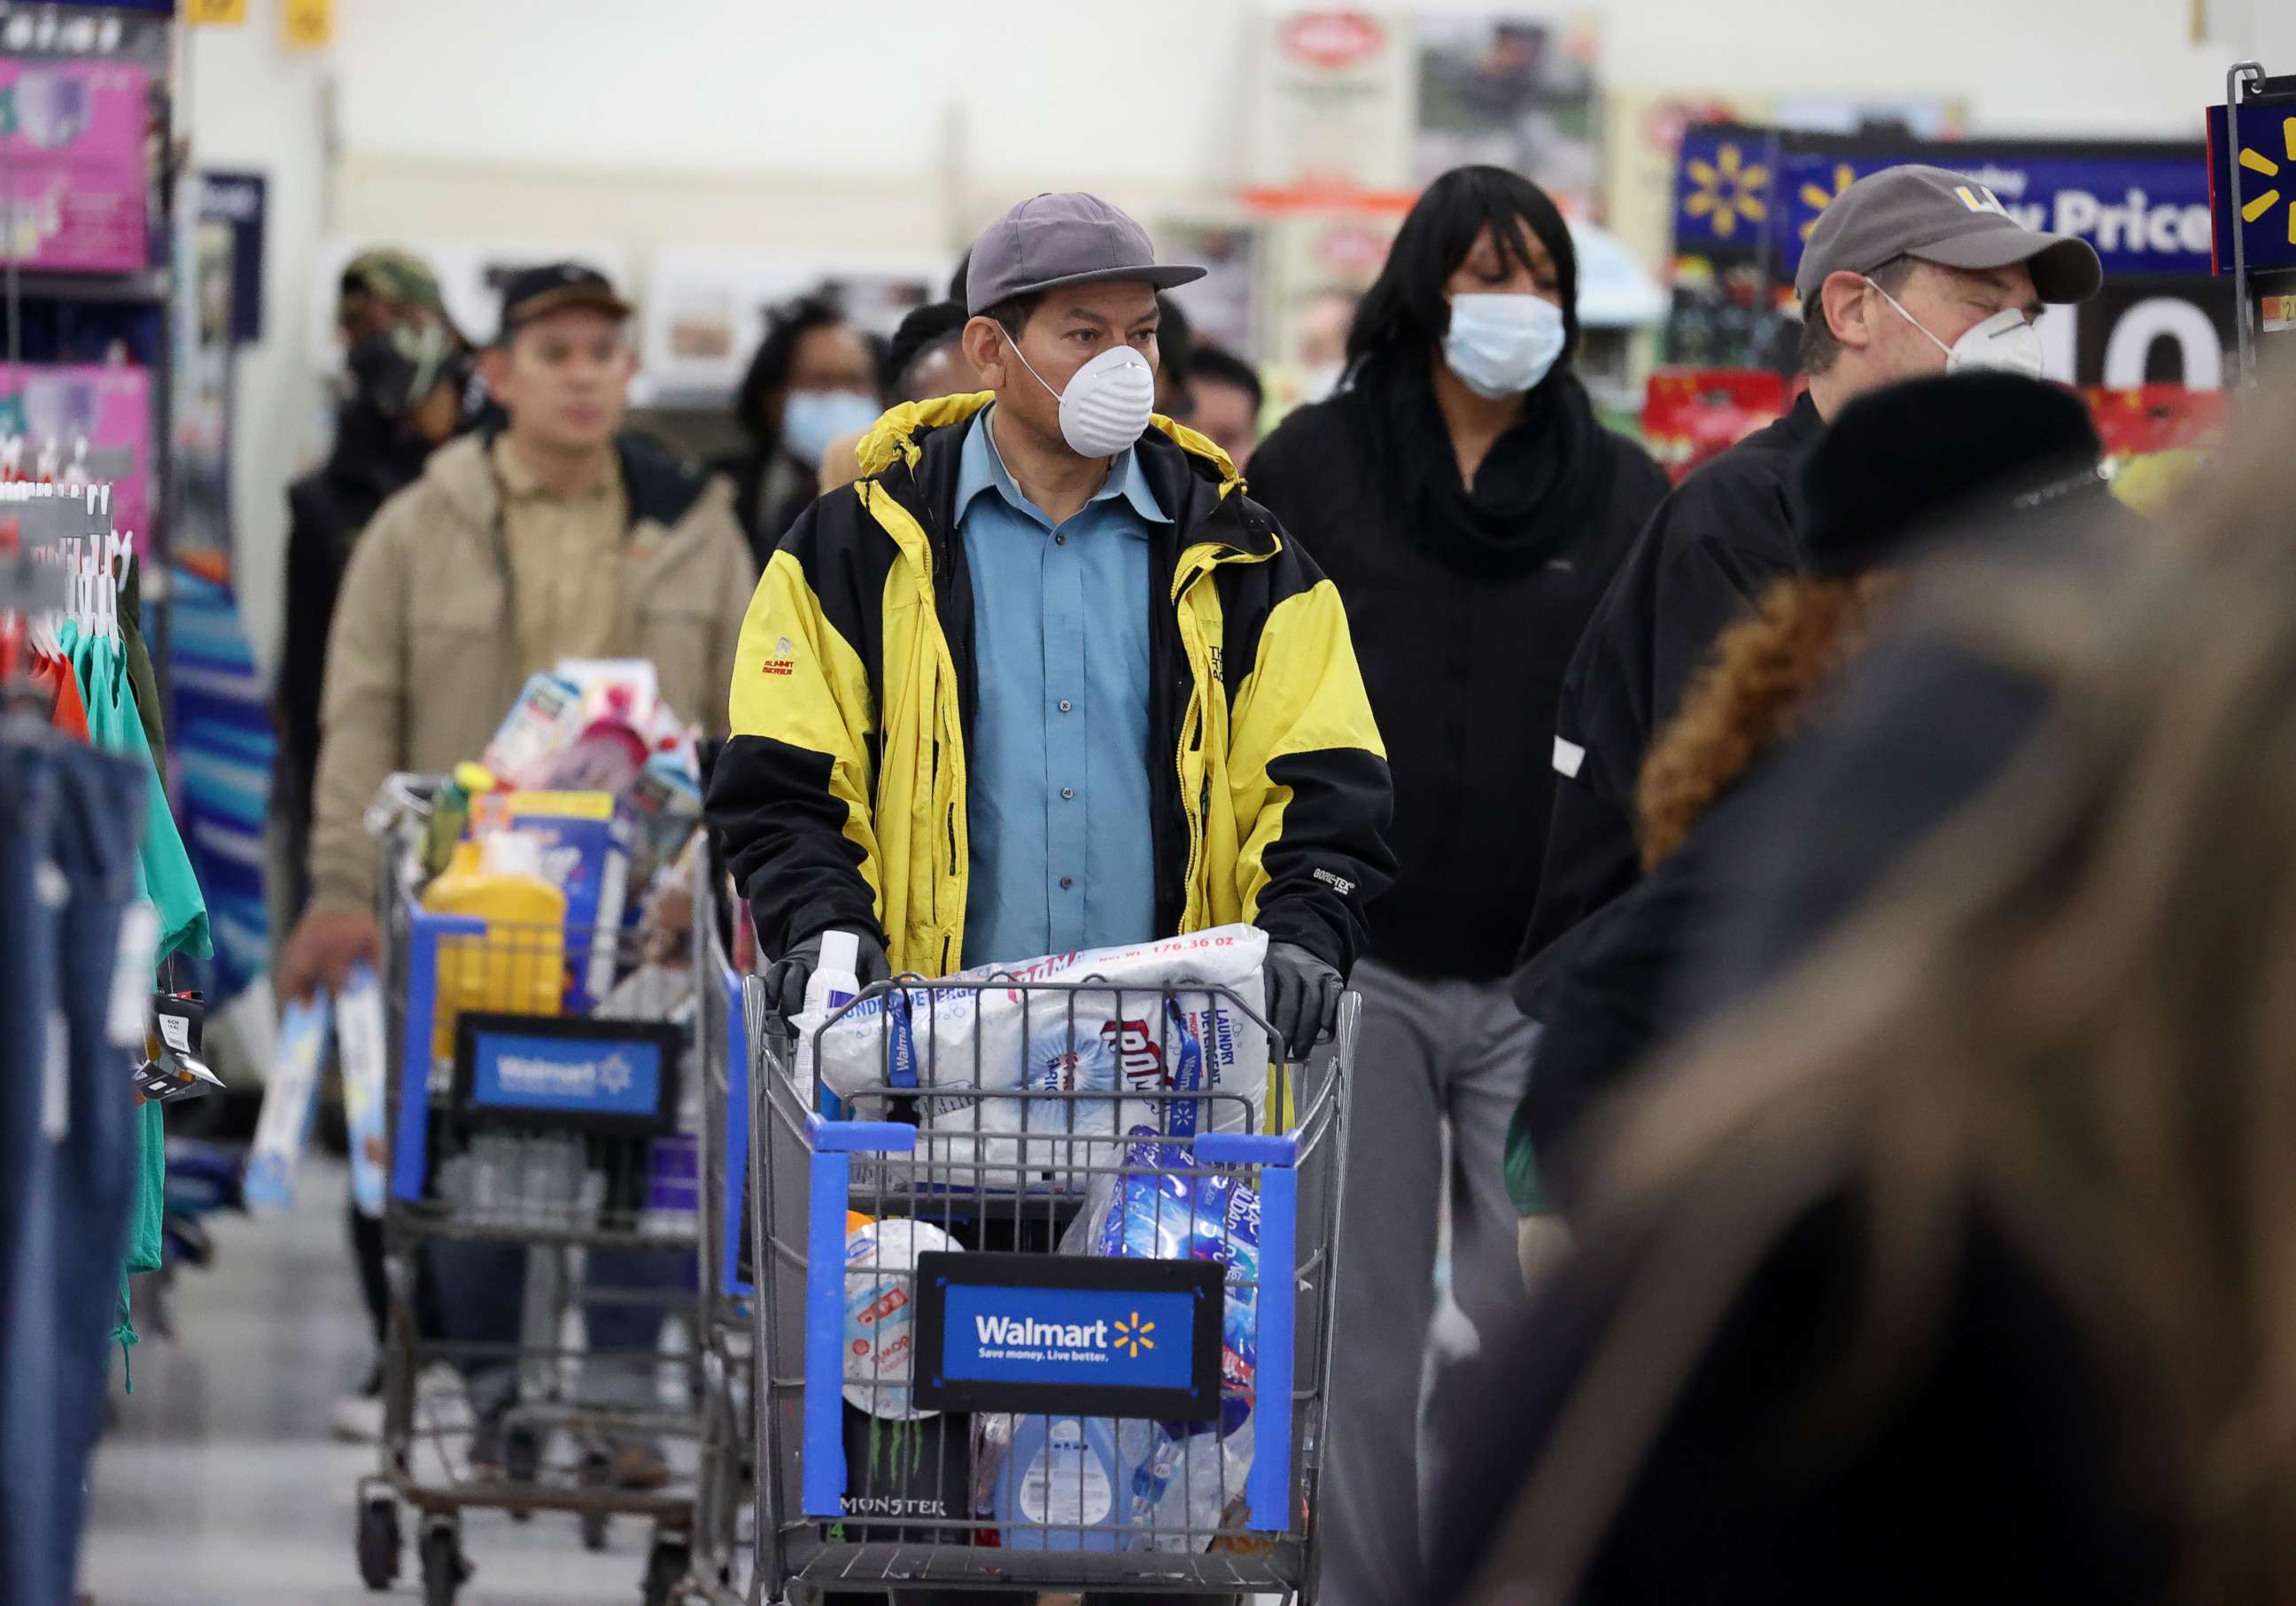 PHOTO: People wearing masks and gloves wait to checkout at Walmart on April 03, 2020 in Uniondale, New York.